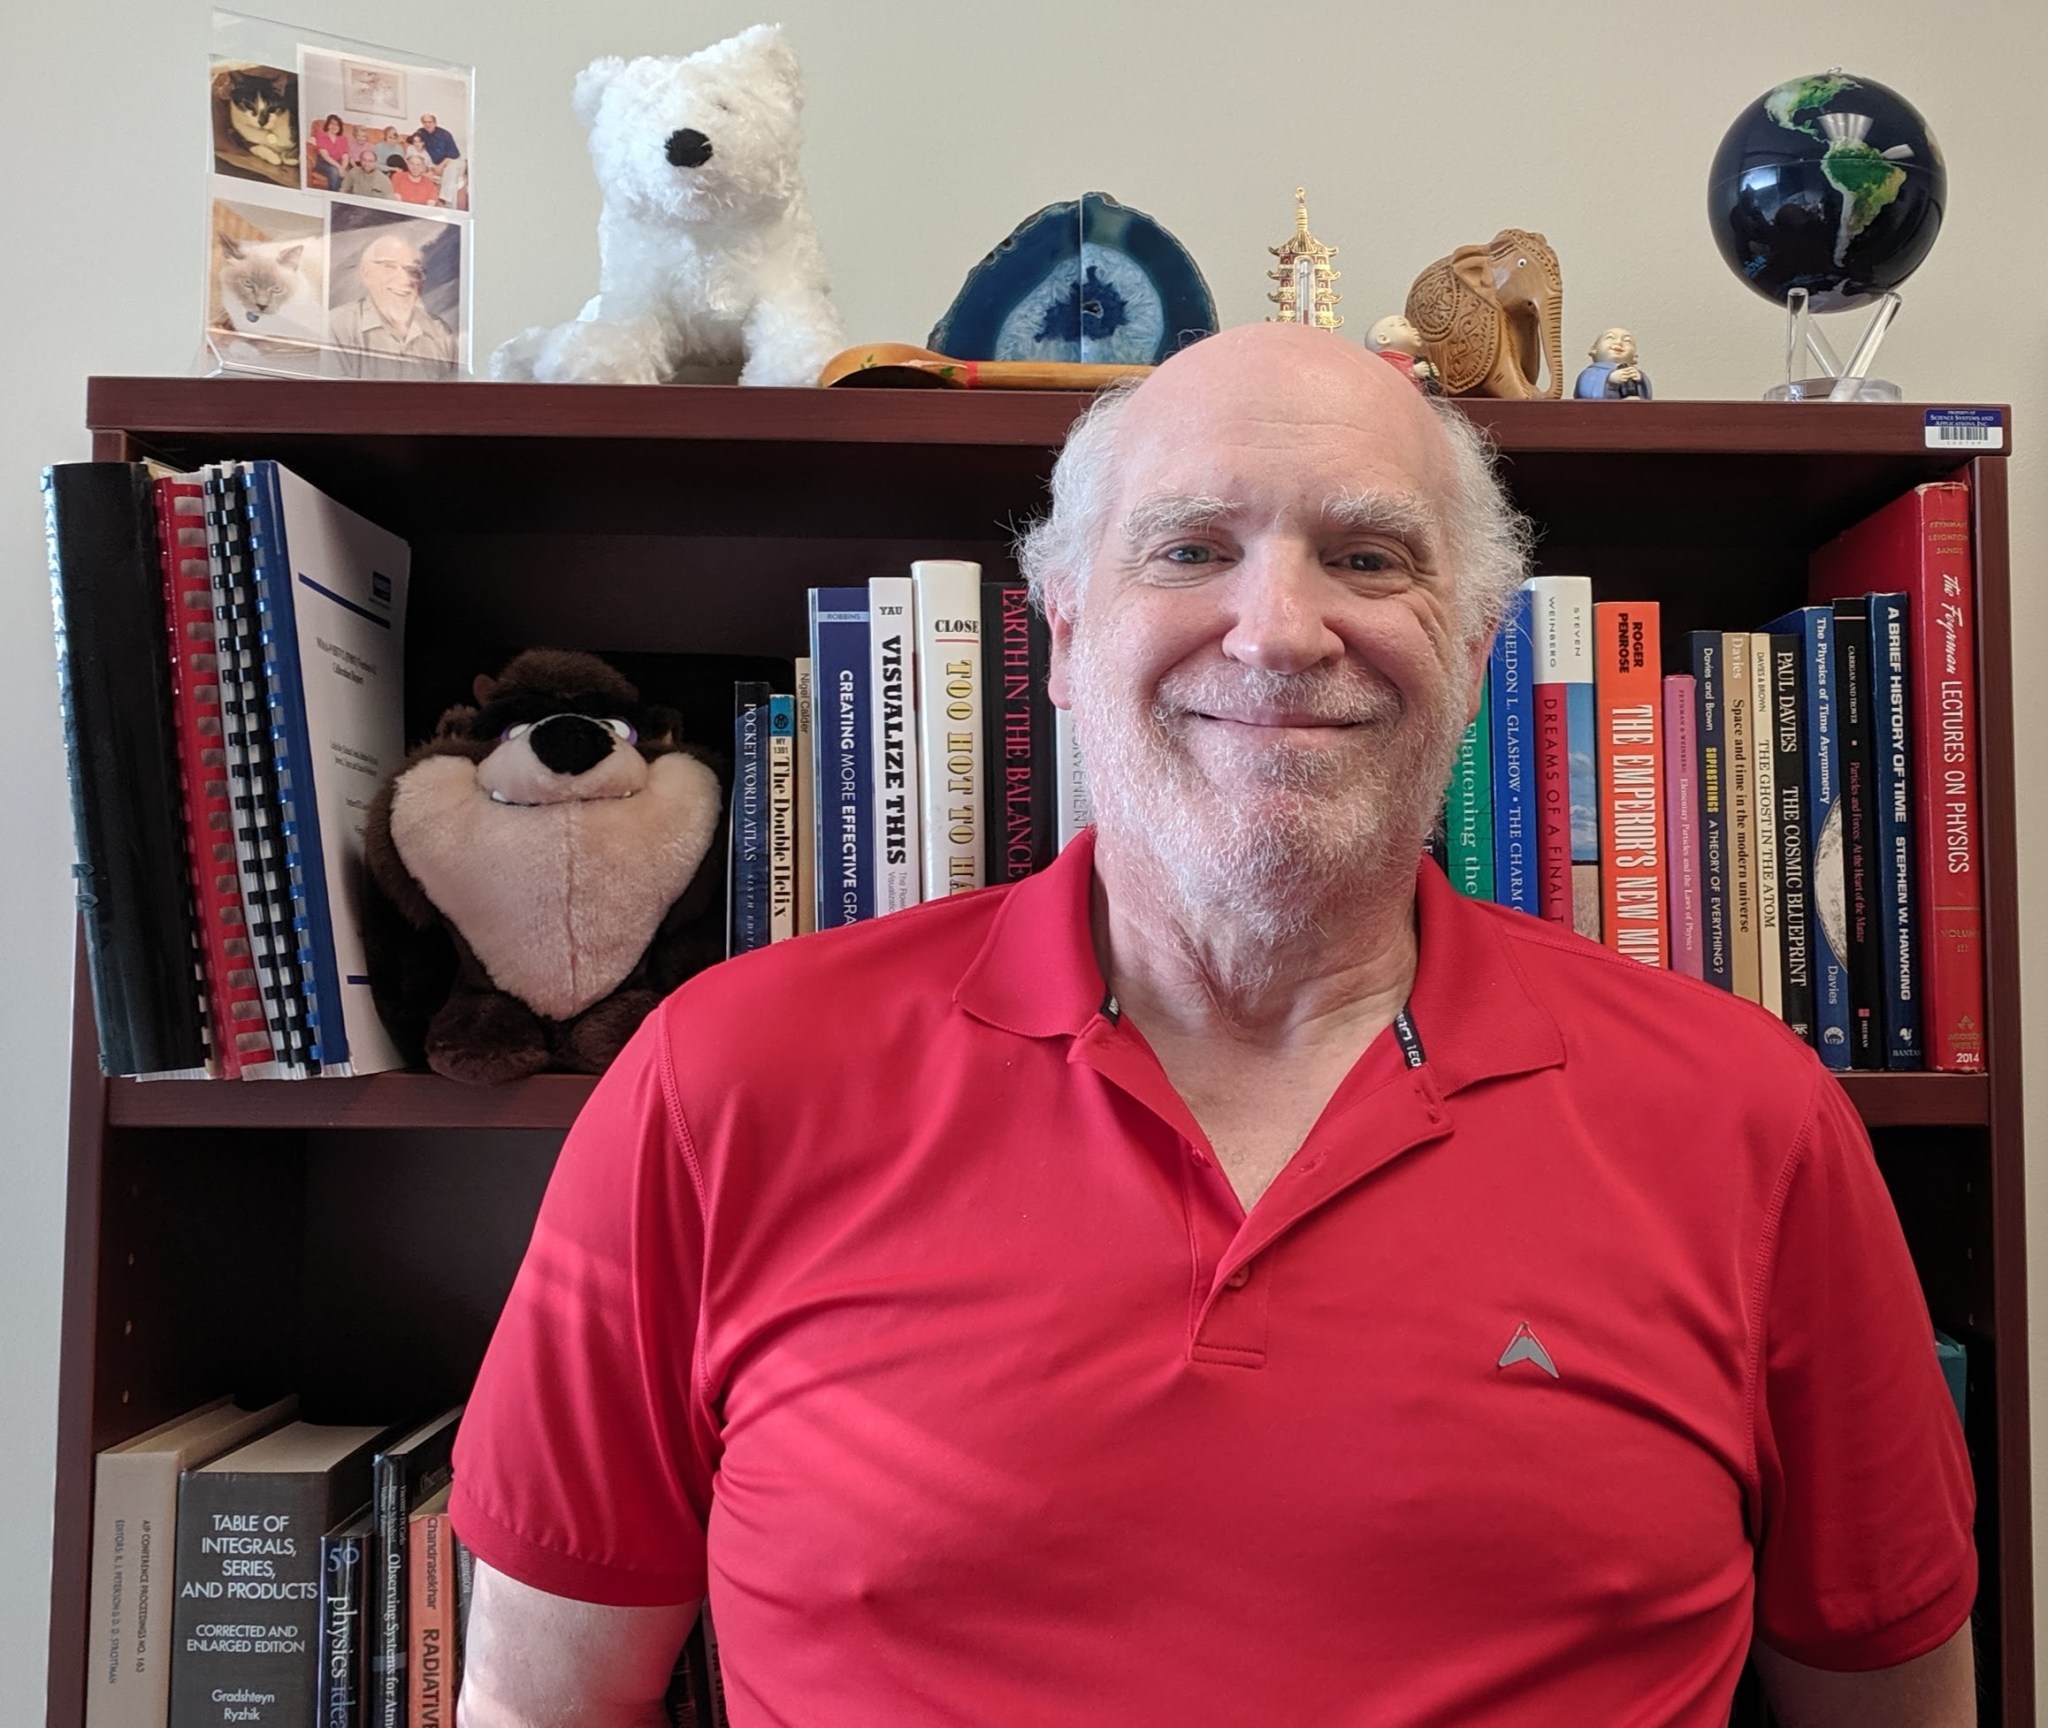 Man with fair skin and white hair wears a red polo shirt. He is smiling, standing in front of a bookcase. The bookcase has a variety of books and a stuffed Tasmanian Devil on the shelves. On the top of the book case, there are photos, a stuffed white dog, a globe, and other knick knacks.  